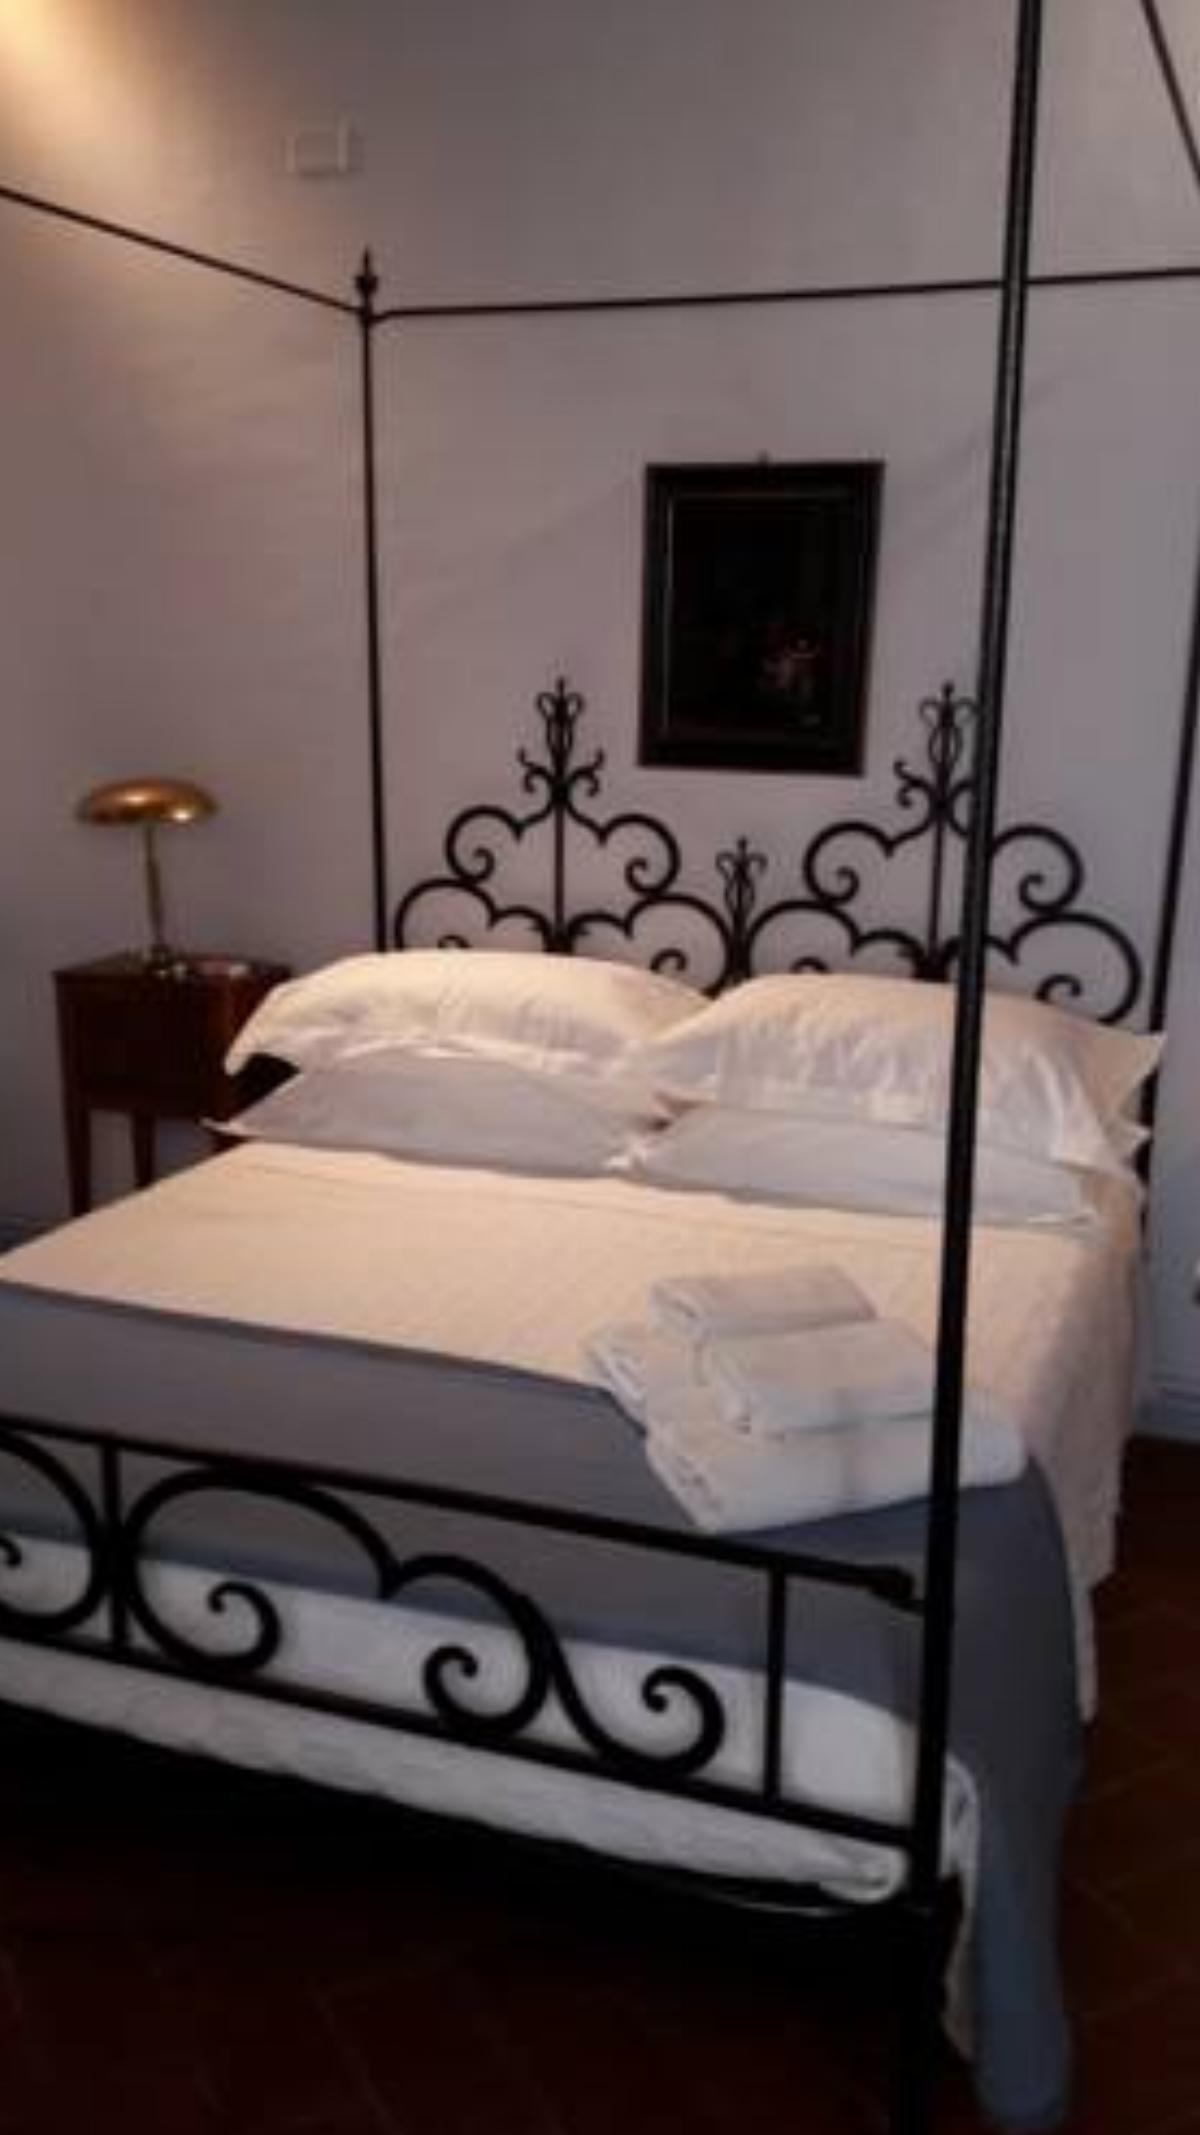 B & B Righi in Santa Croce Hotel Florence Italy